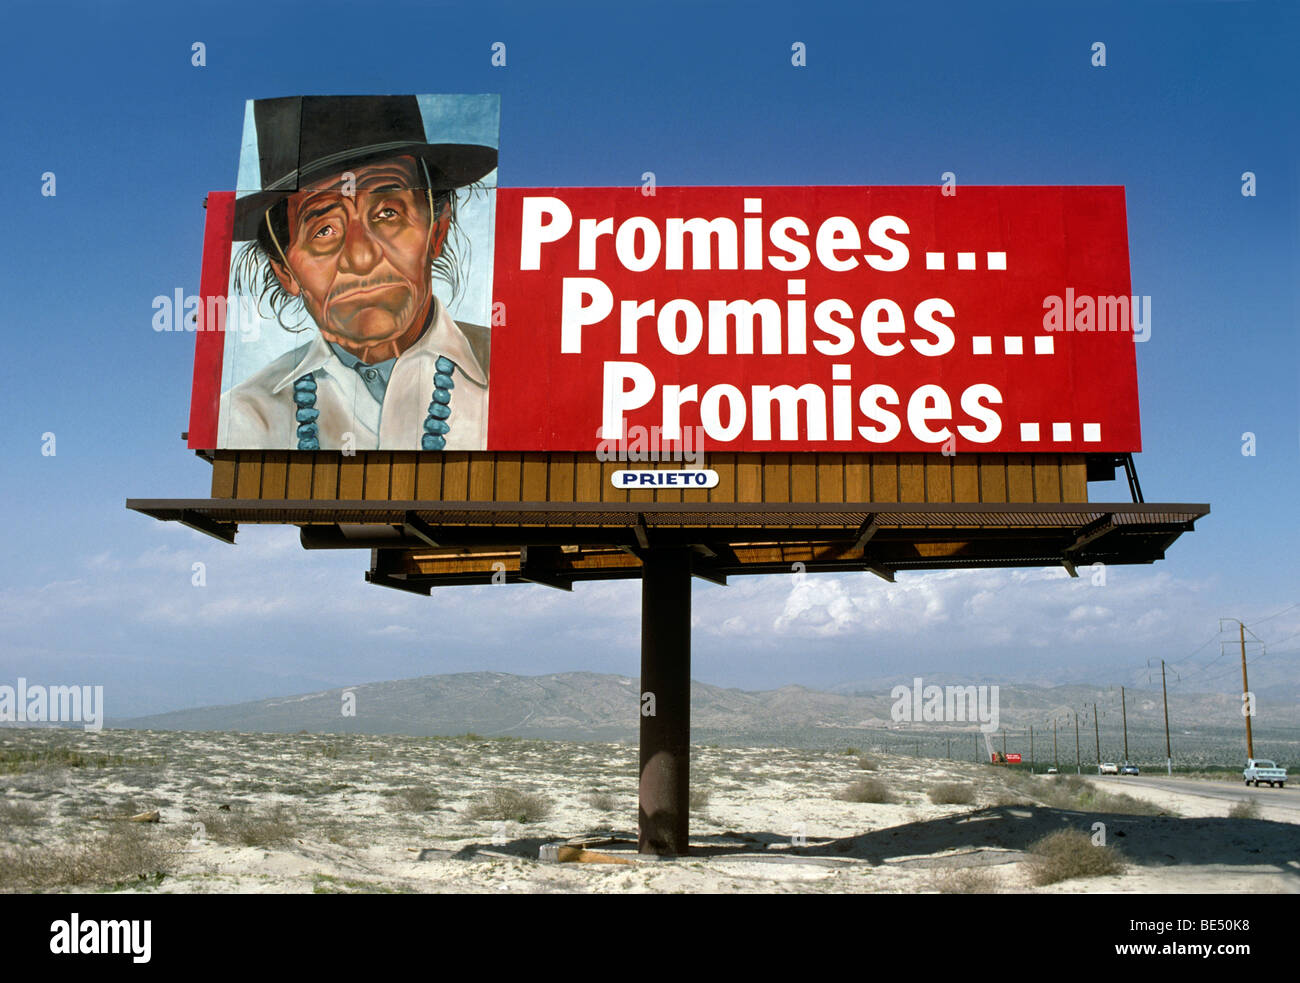 Political billboard protesting the treatment of Native Americans Stock Photo